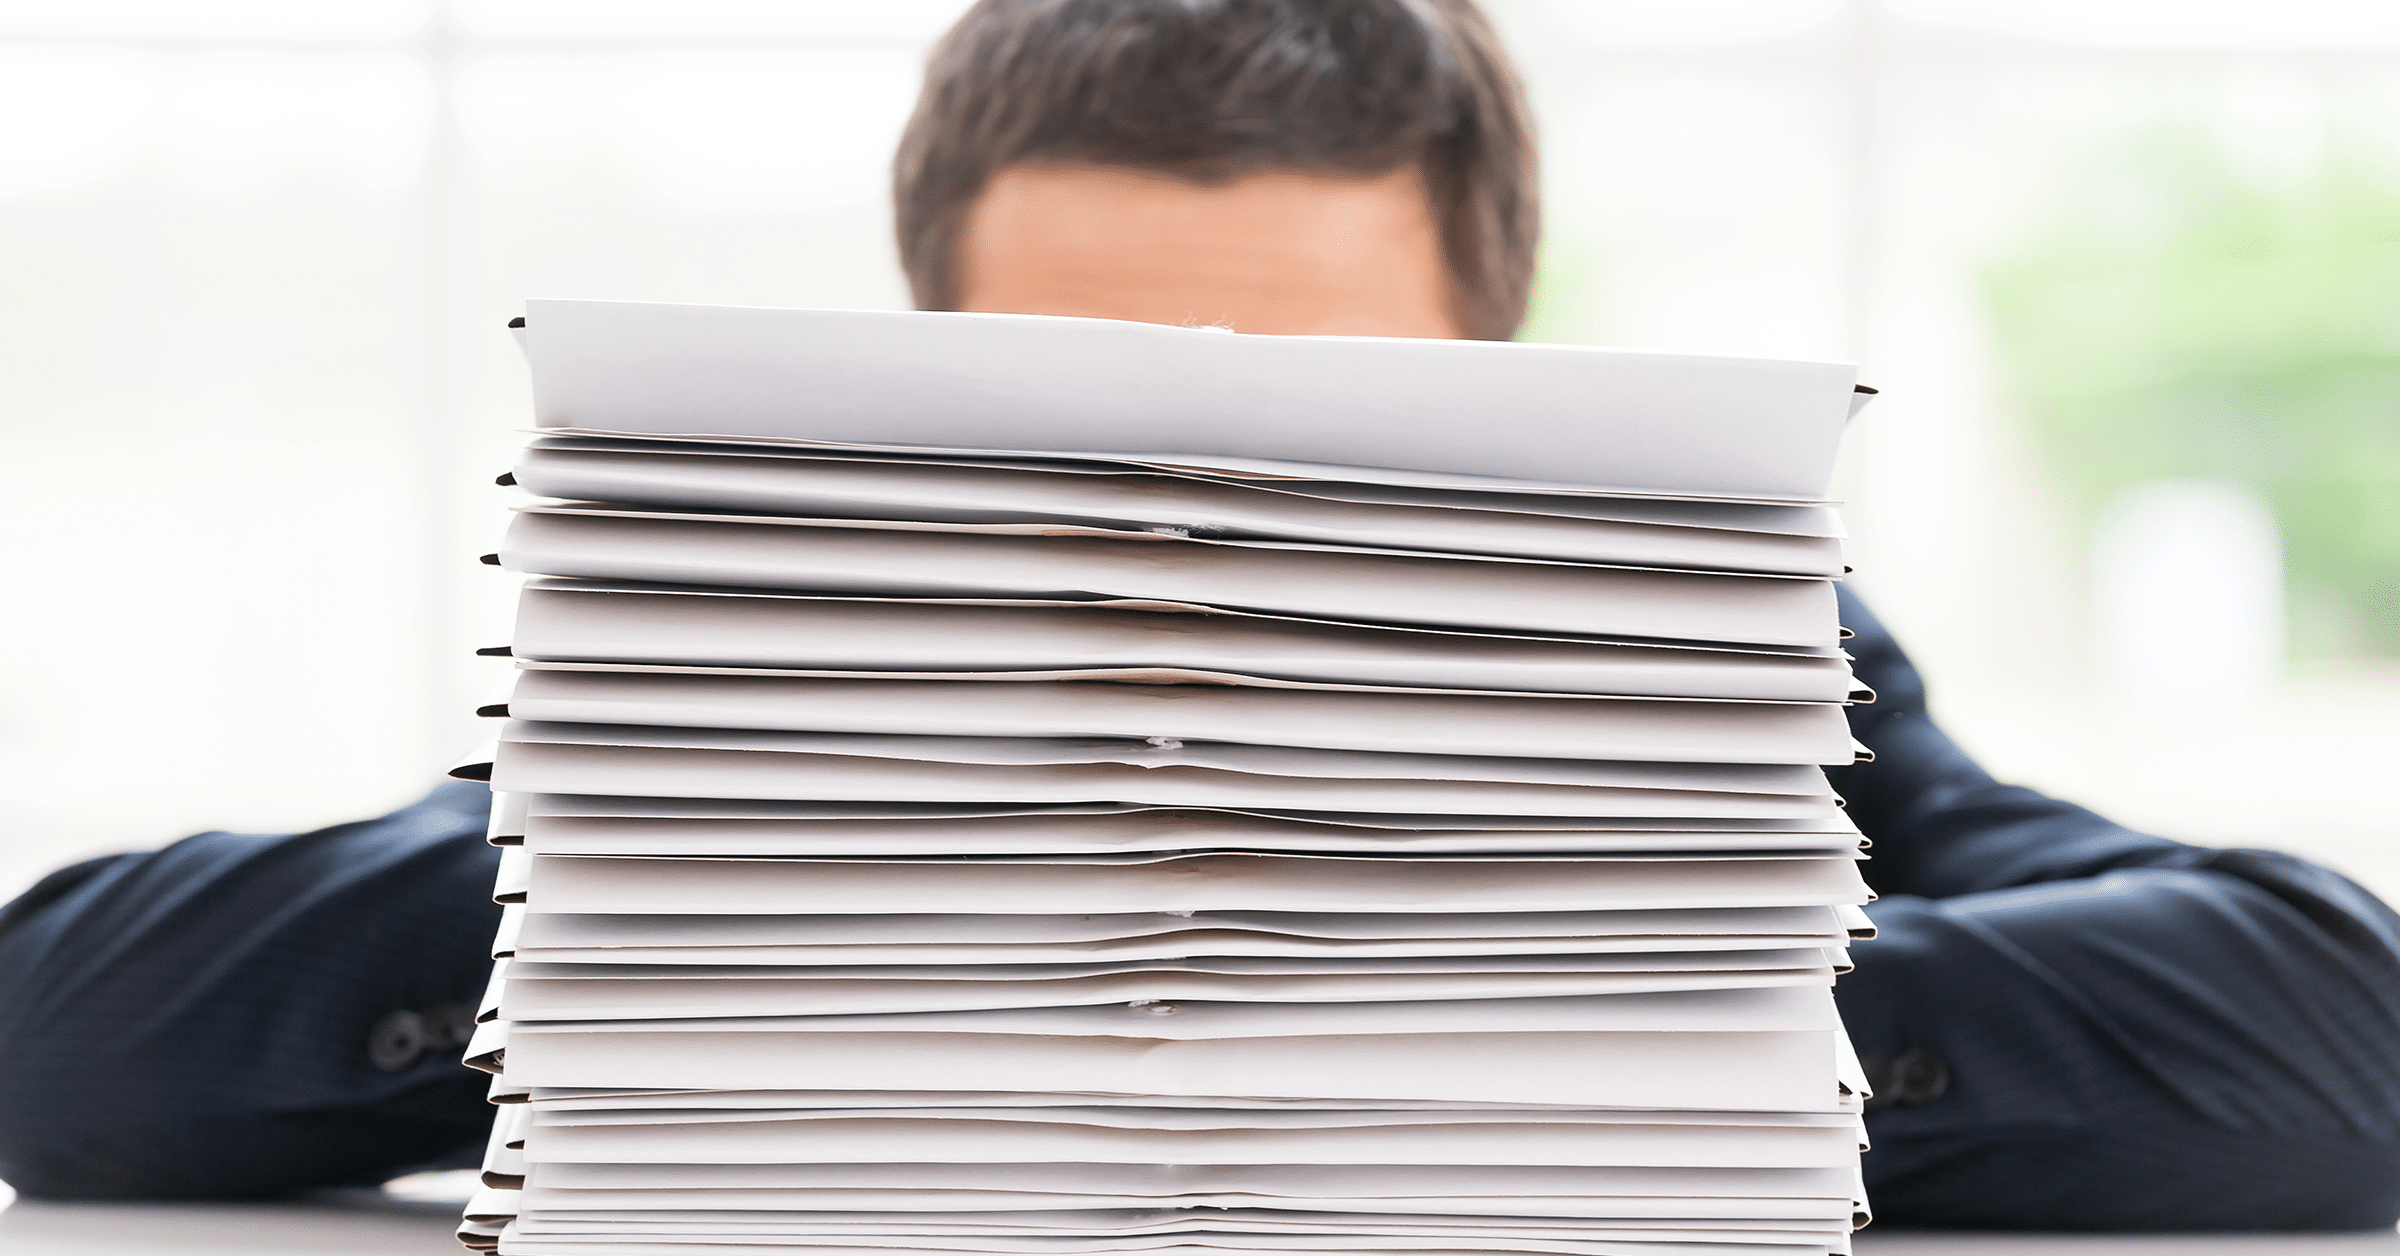 giant stack of papers covers man's face